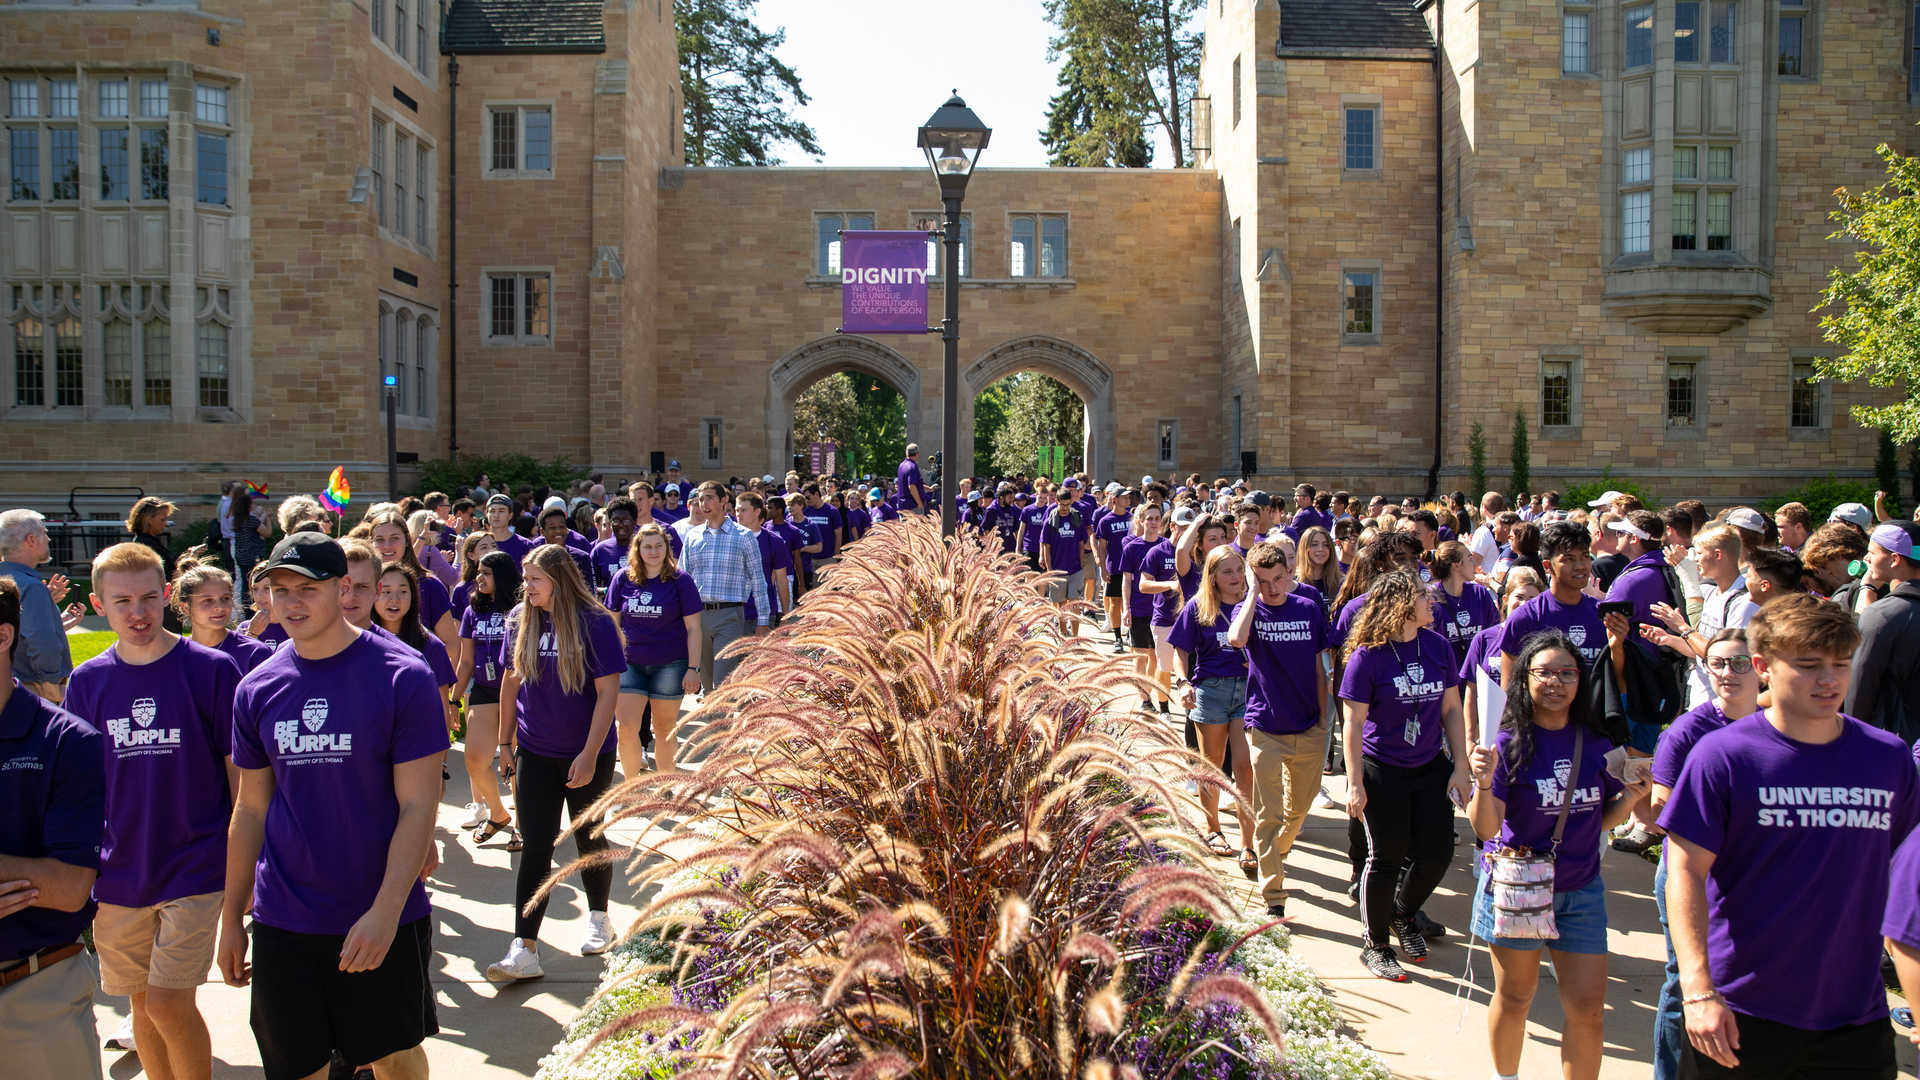 Students March through the Arches